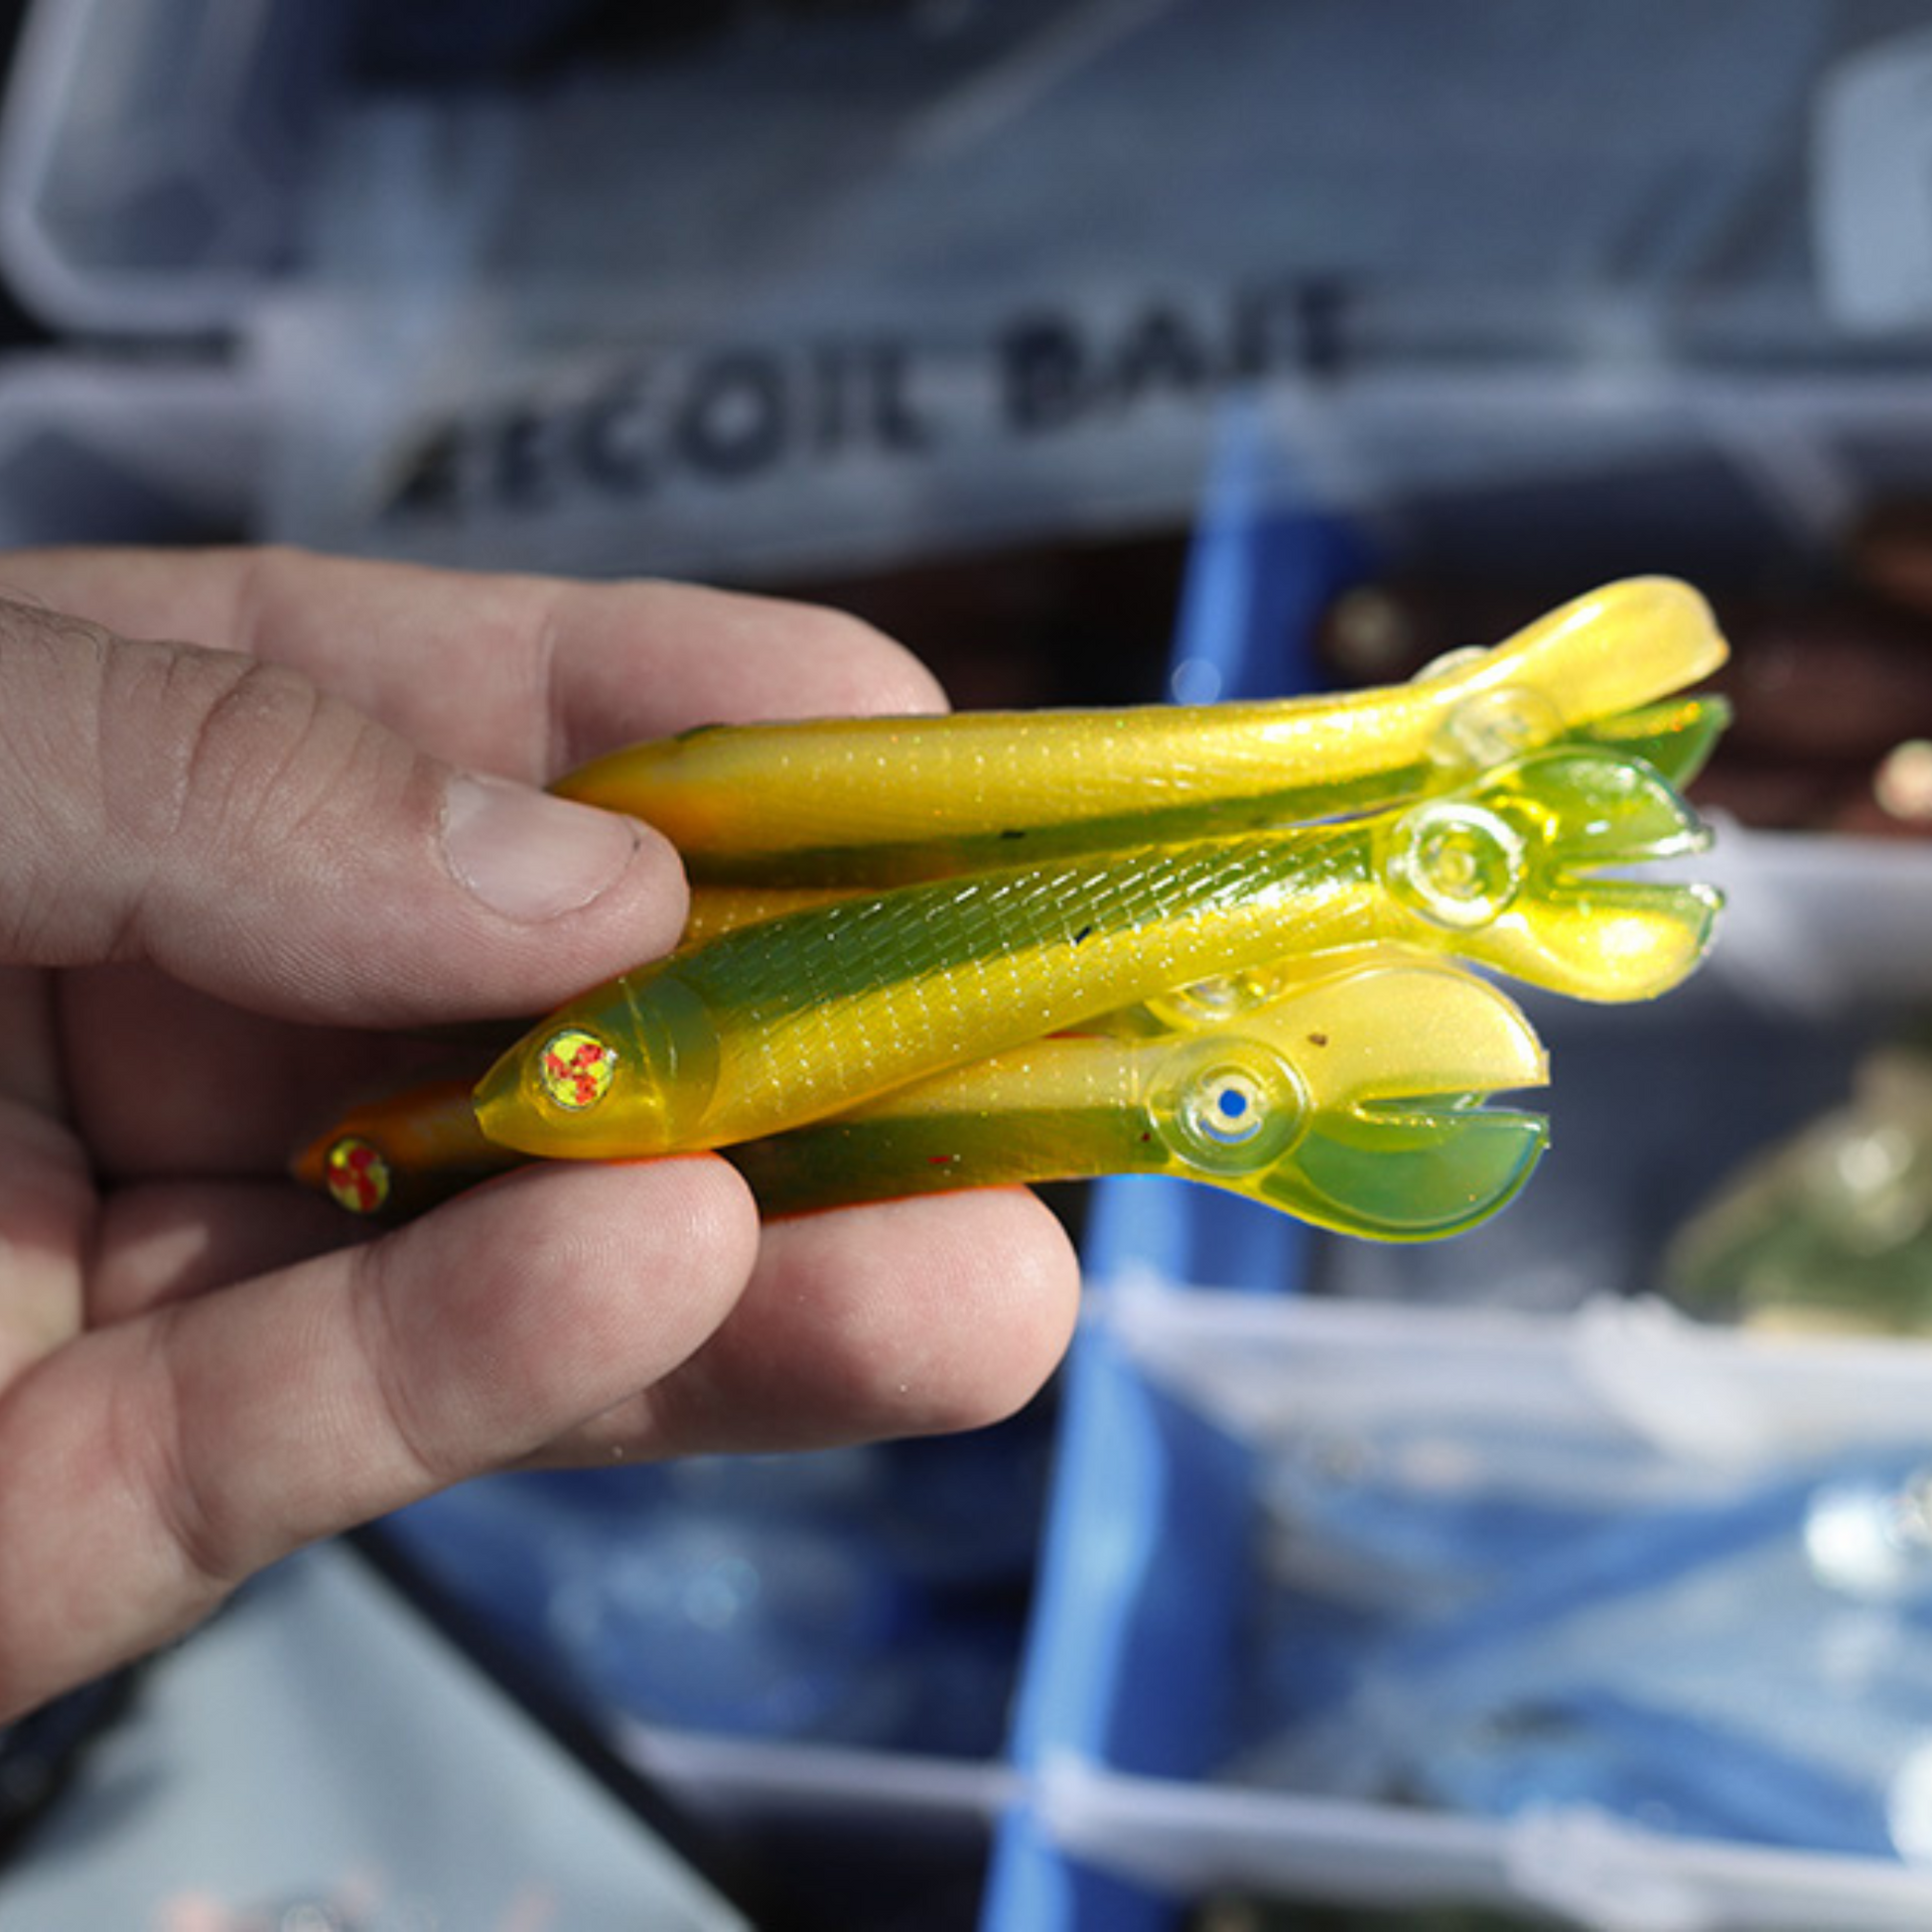 5.25 5pc. Recoil Baits - Bad Penny – Lawless Lures